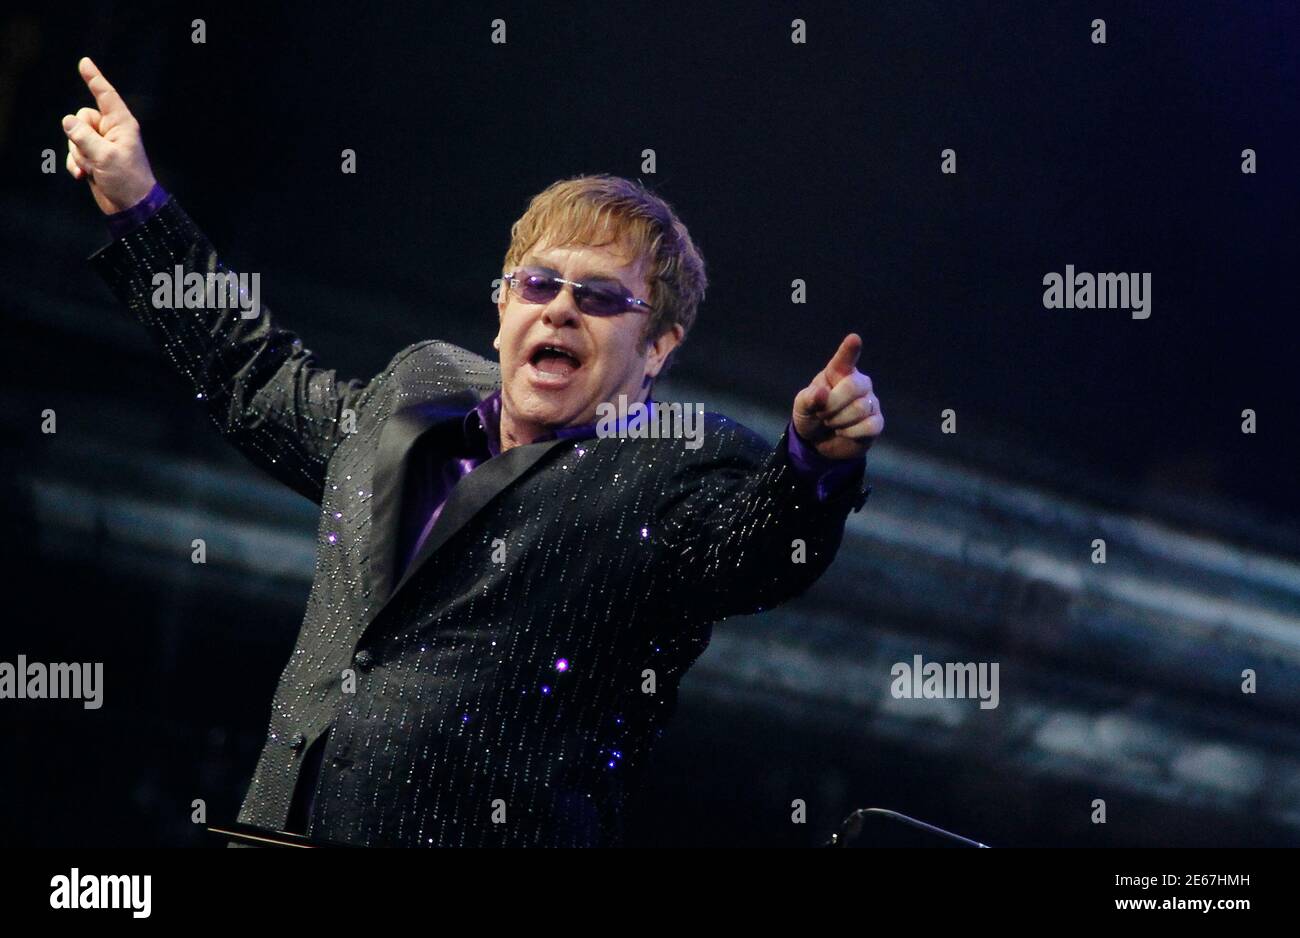 Singer Elton John Performs At A Charity Concert Dedicated To The Fight Against Hiv Aids At